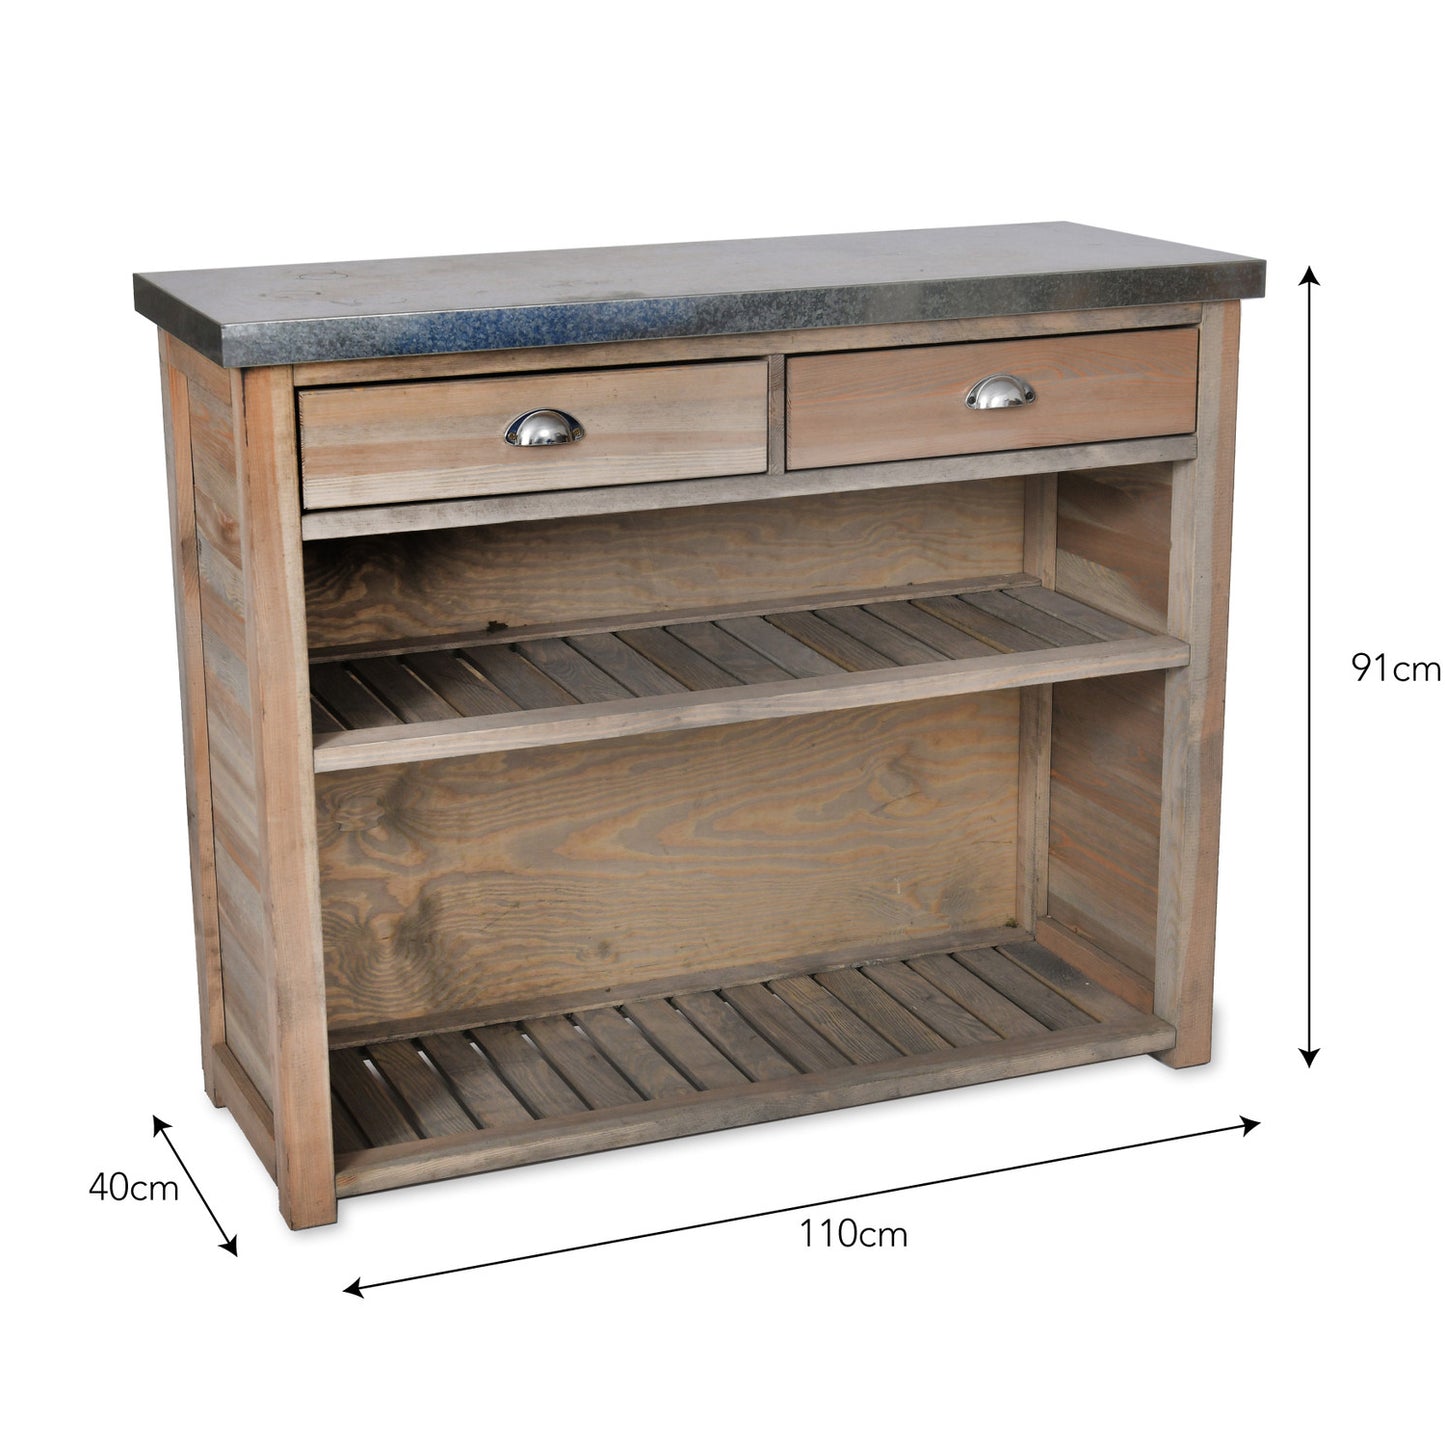 Aldsworth Bootroom Unit in Spruce by Garden Trading